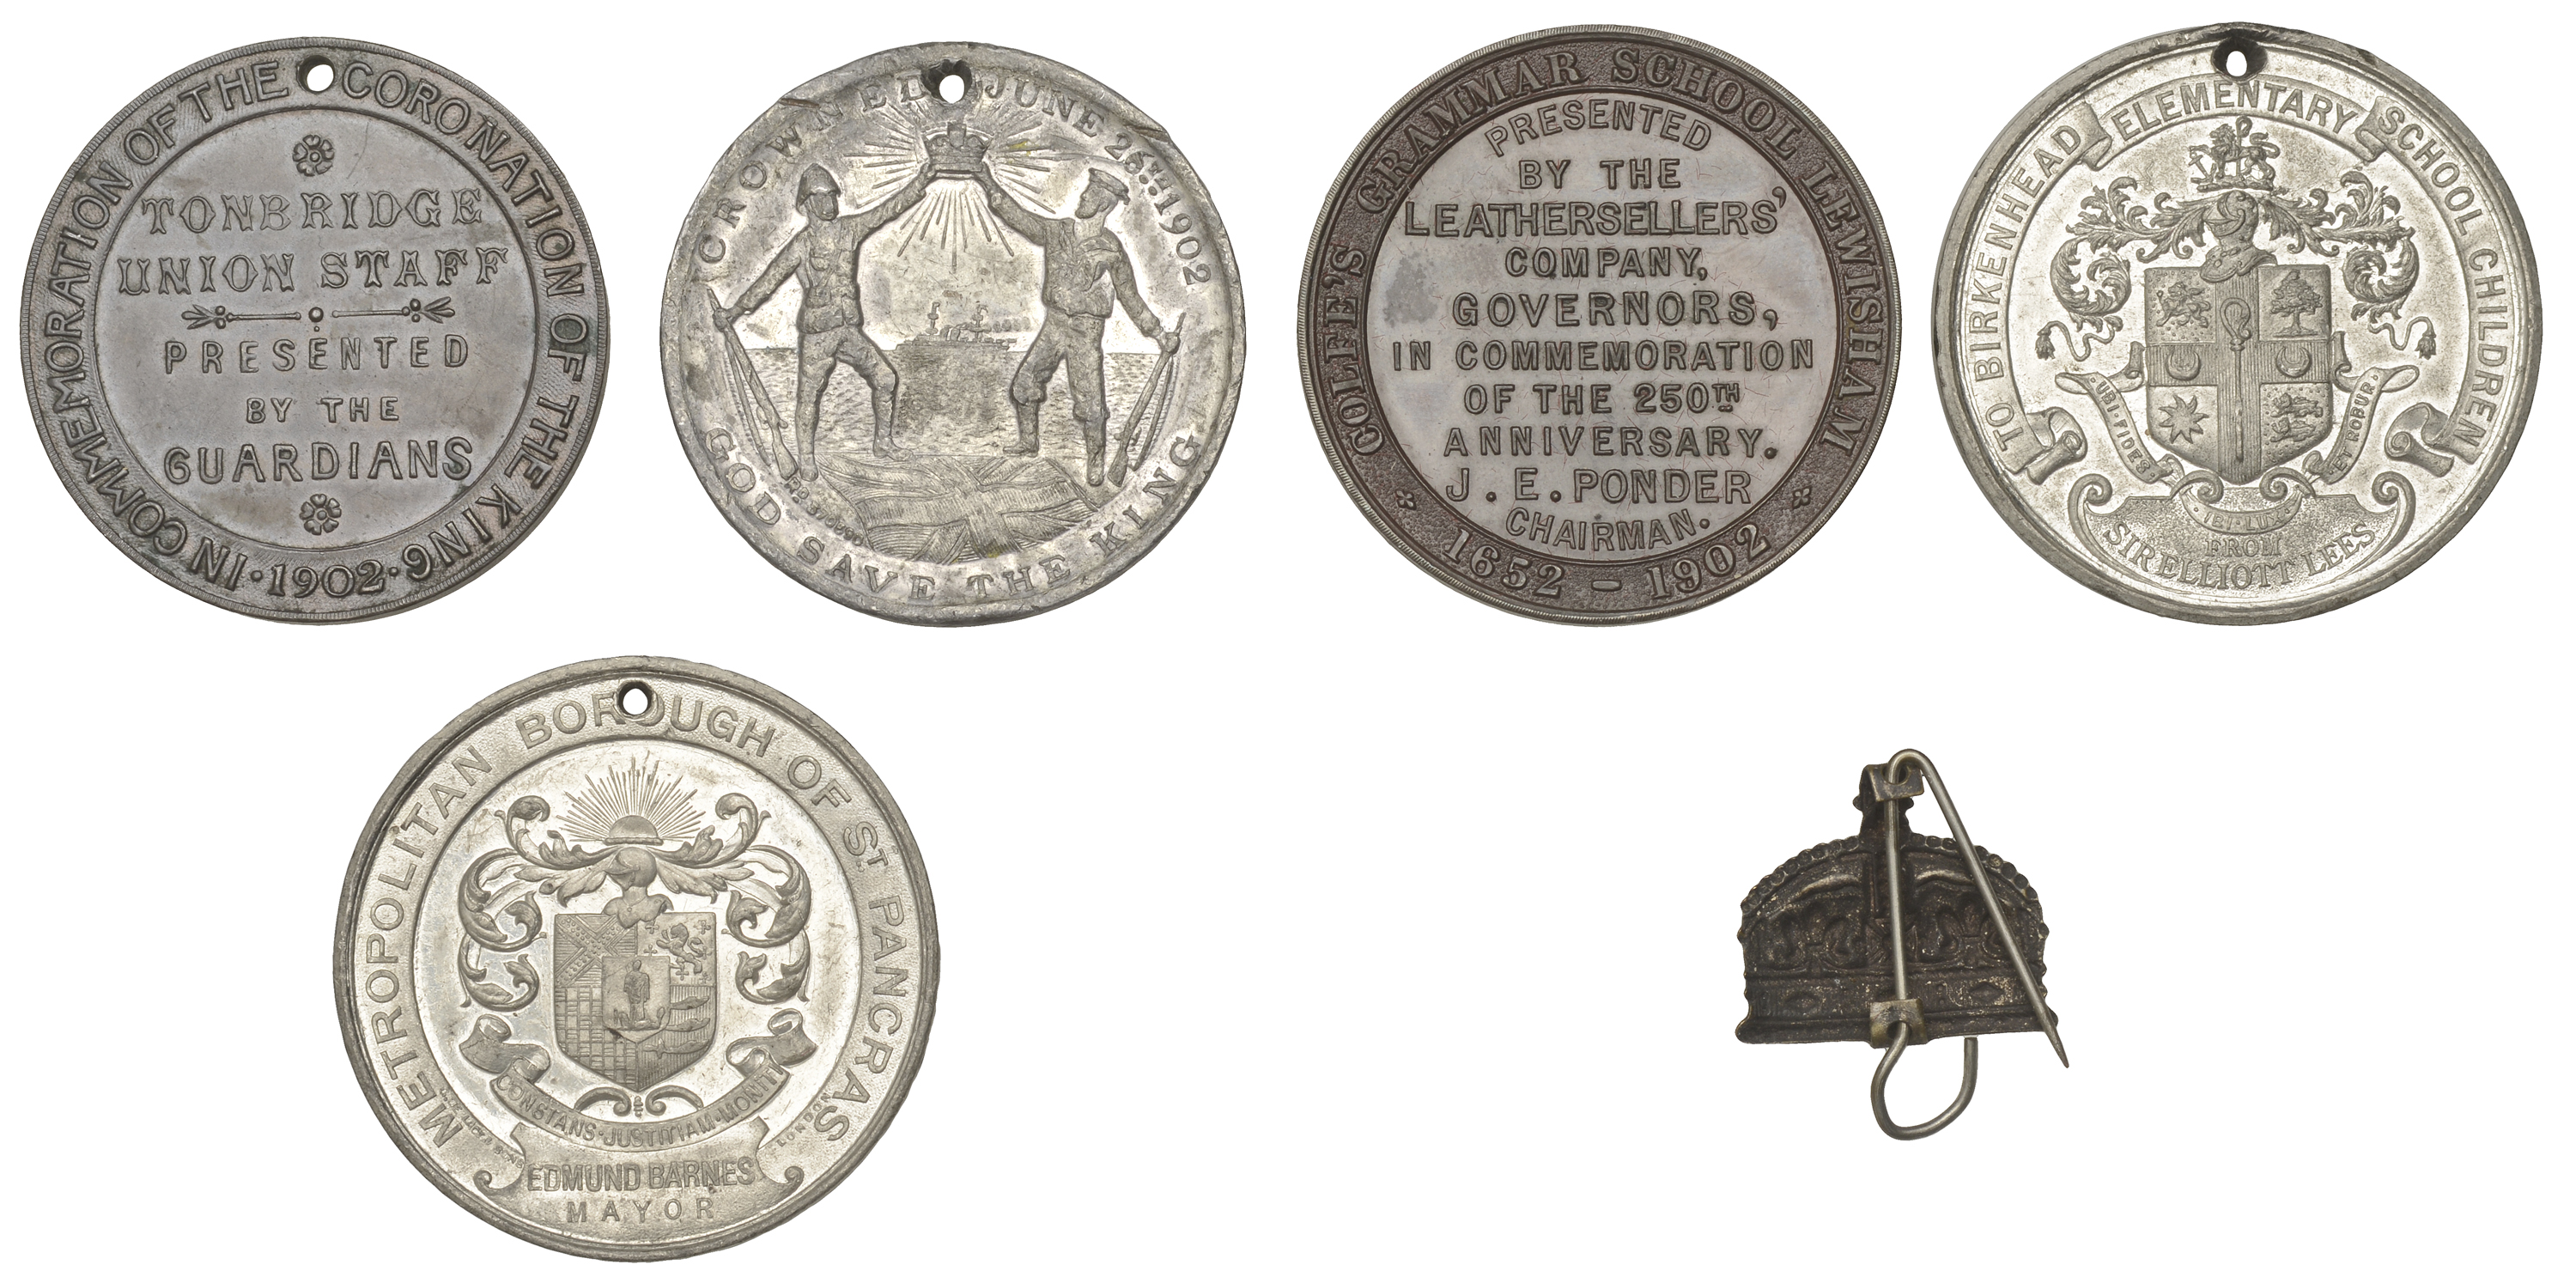 Coronation, 1902, medals (2) by H.B. Sale, white metal, 38mm (C & W 4548A.4), Tonbridge, whi... - Image 2 of 2